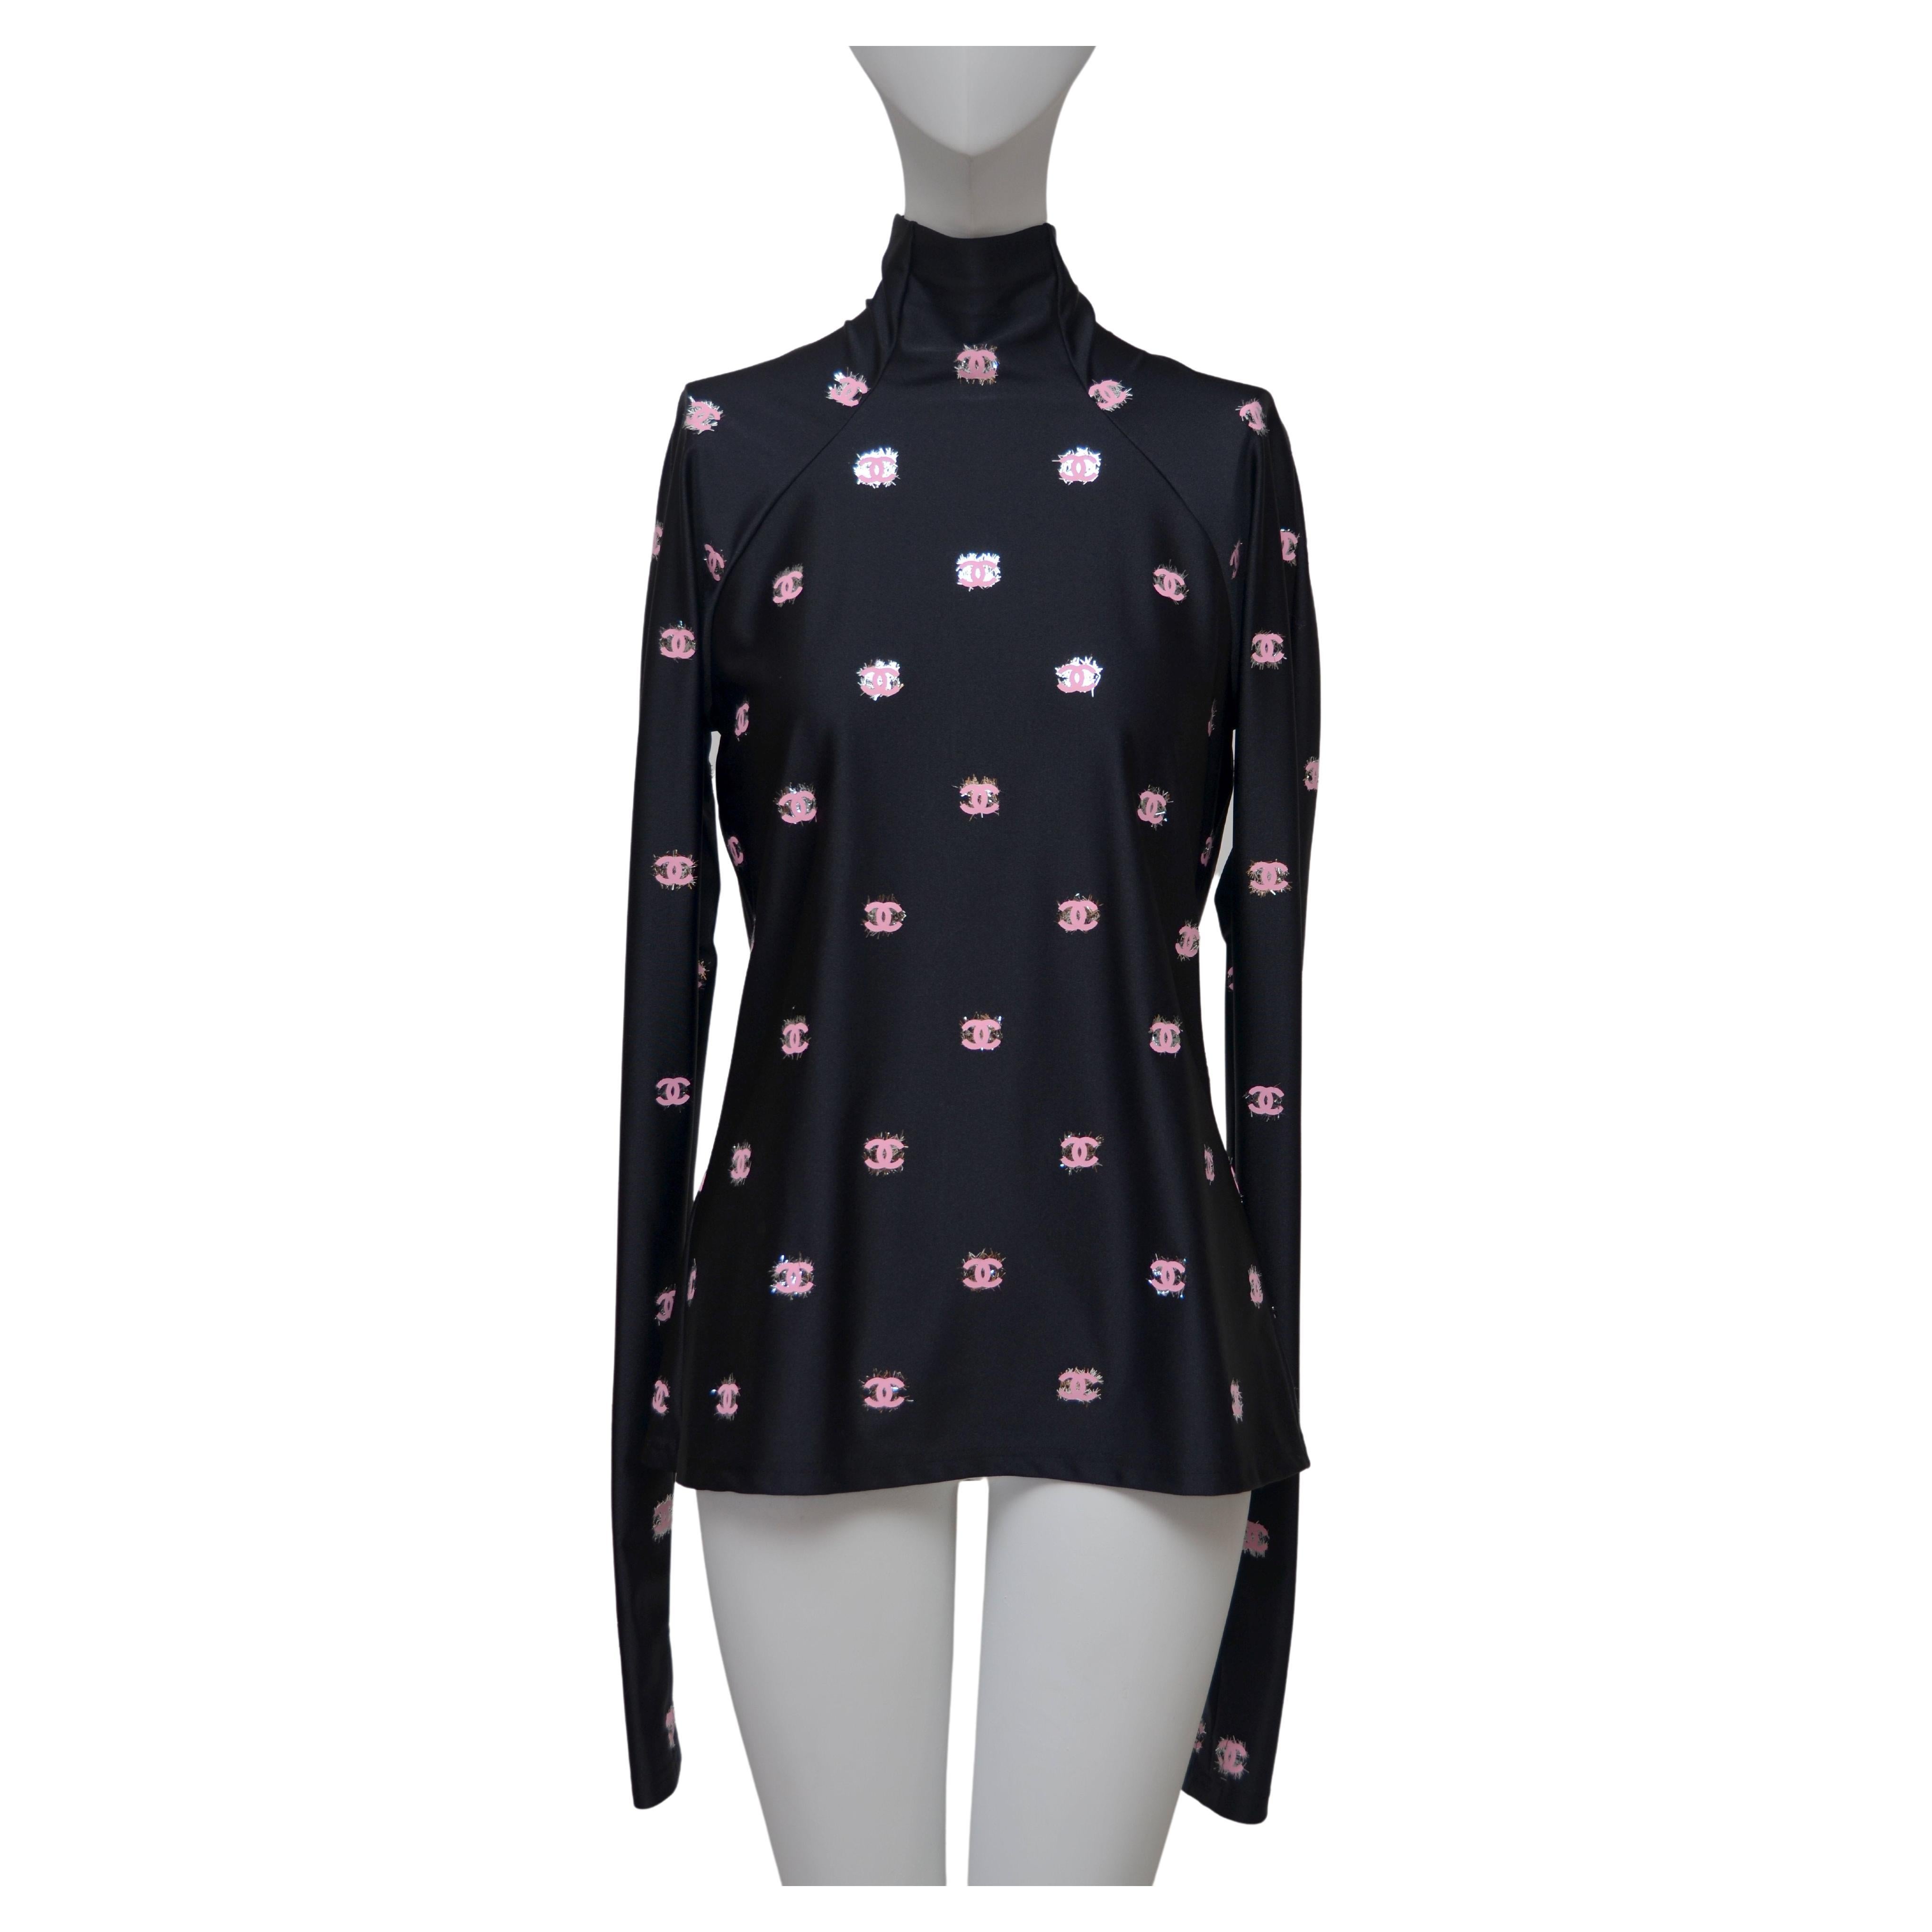 Chanel Black Stretch Top with Pink CC Long Sleeve Sz 42 New